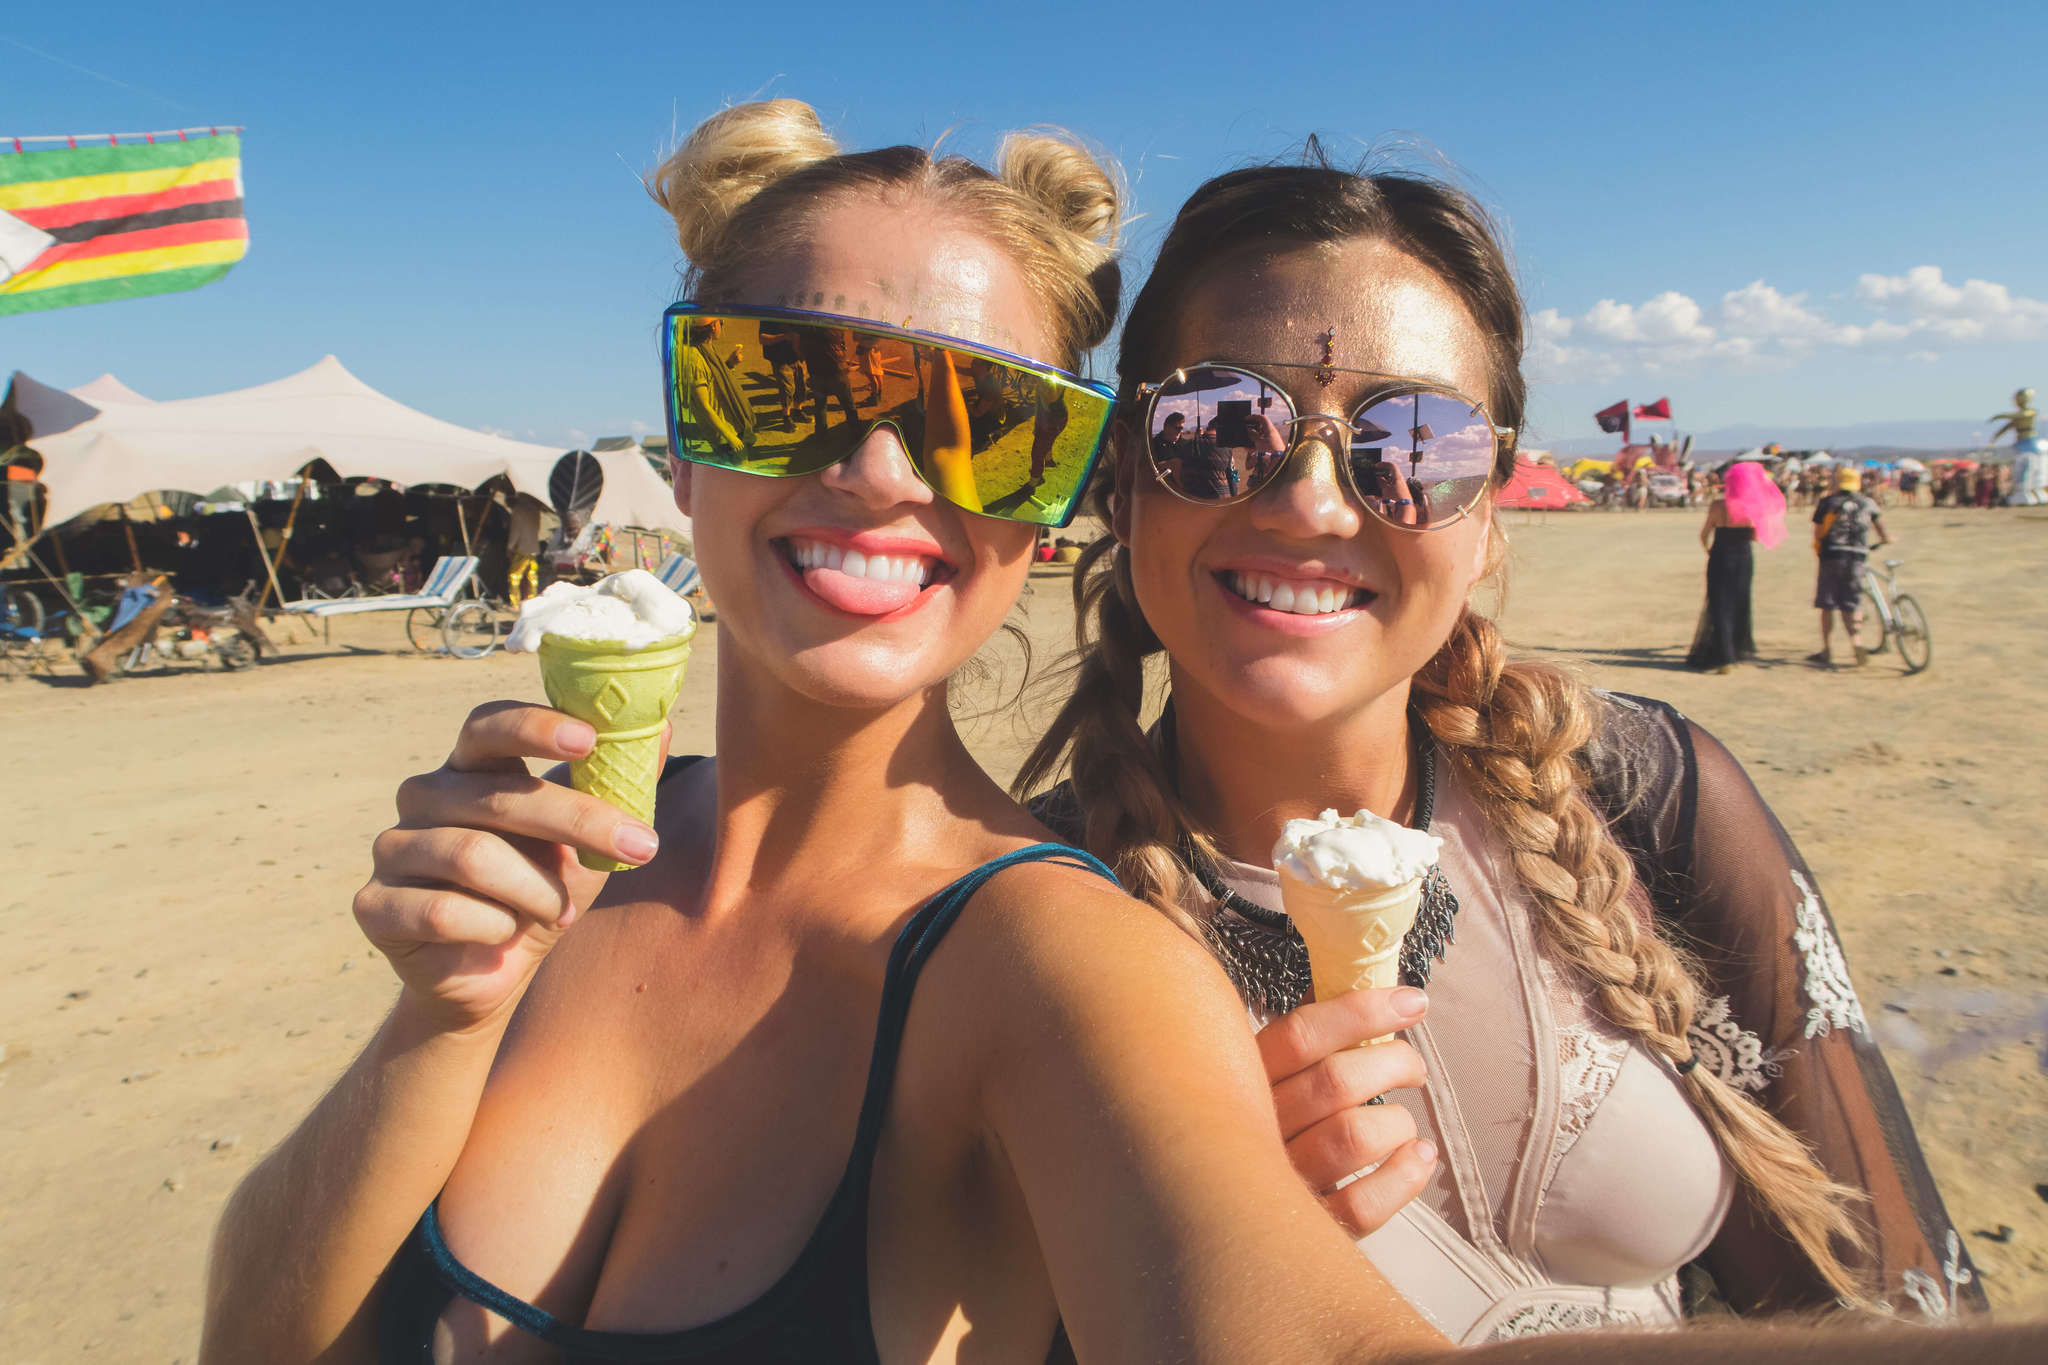 What to Pack for AfrikaBurn • The Blonde Abroad